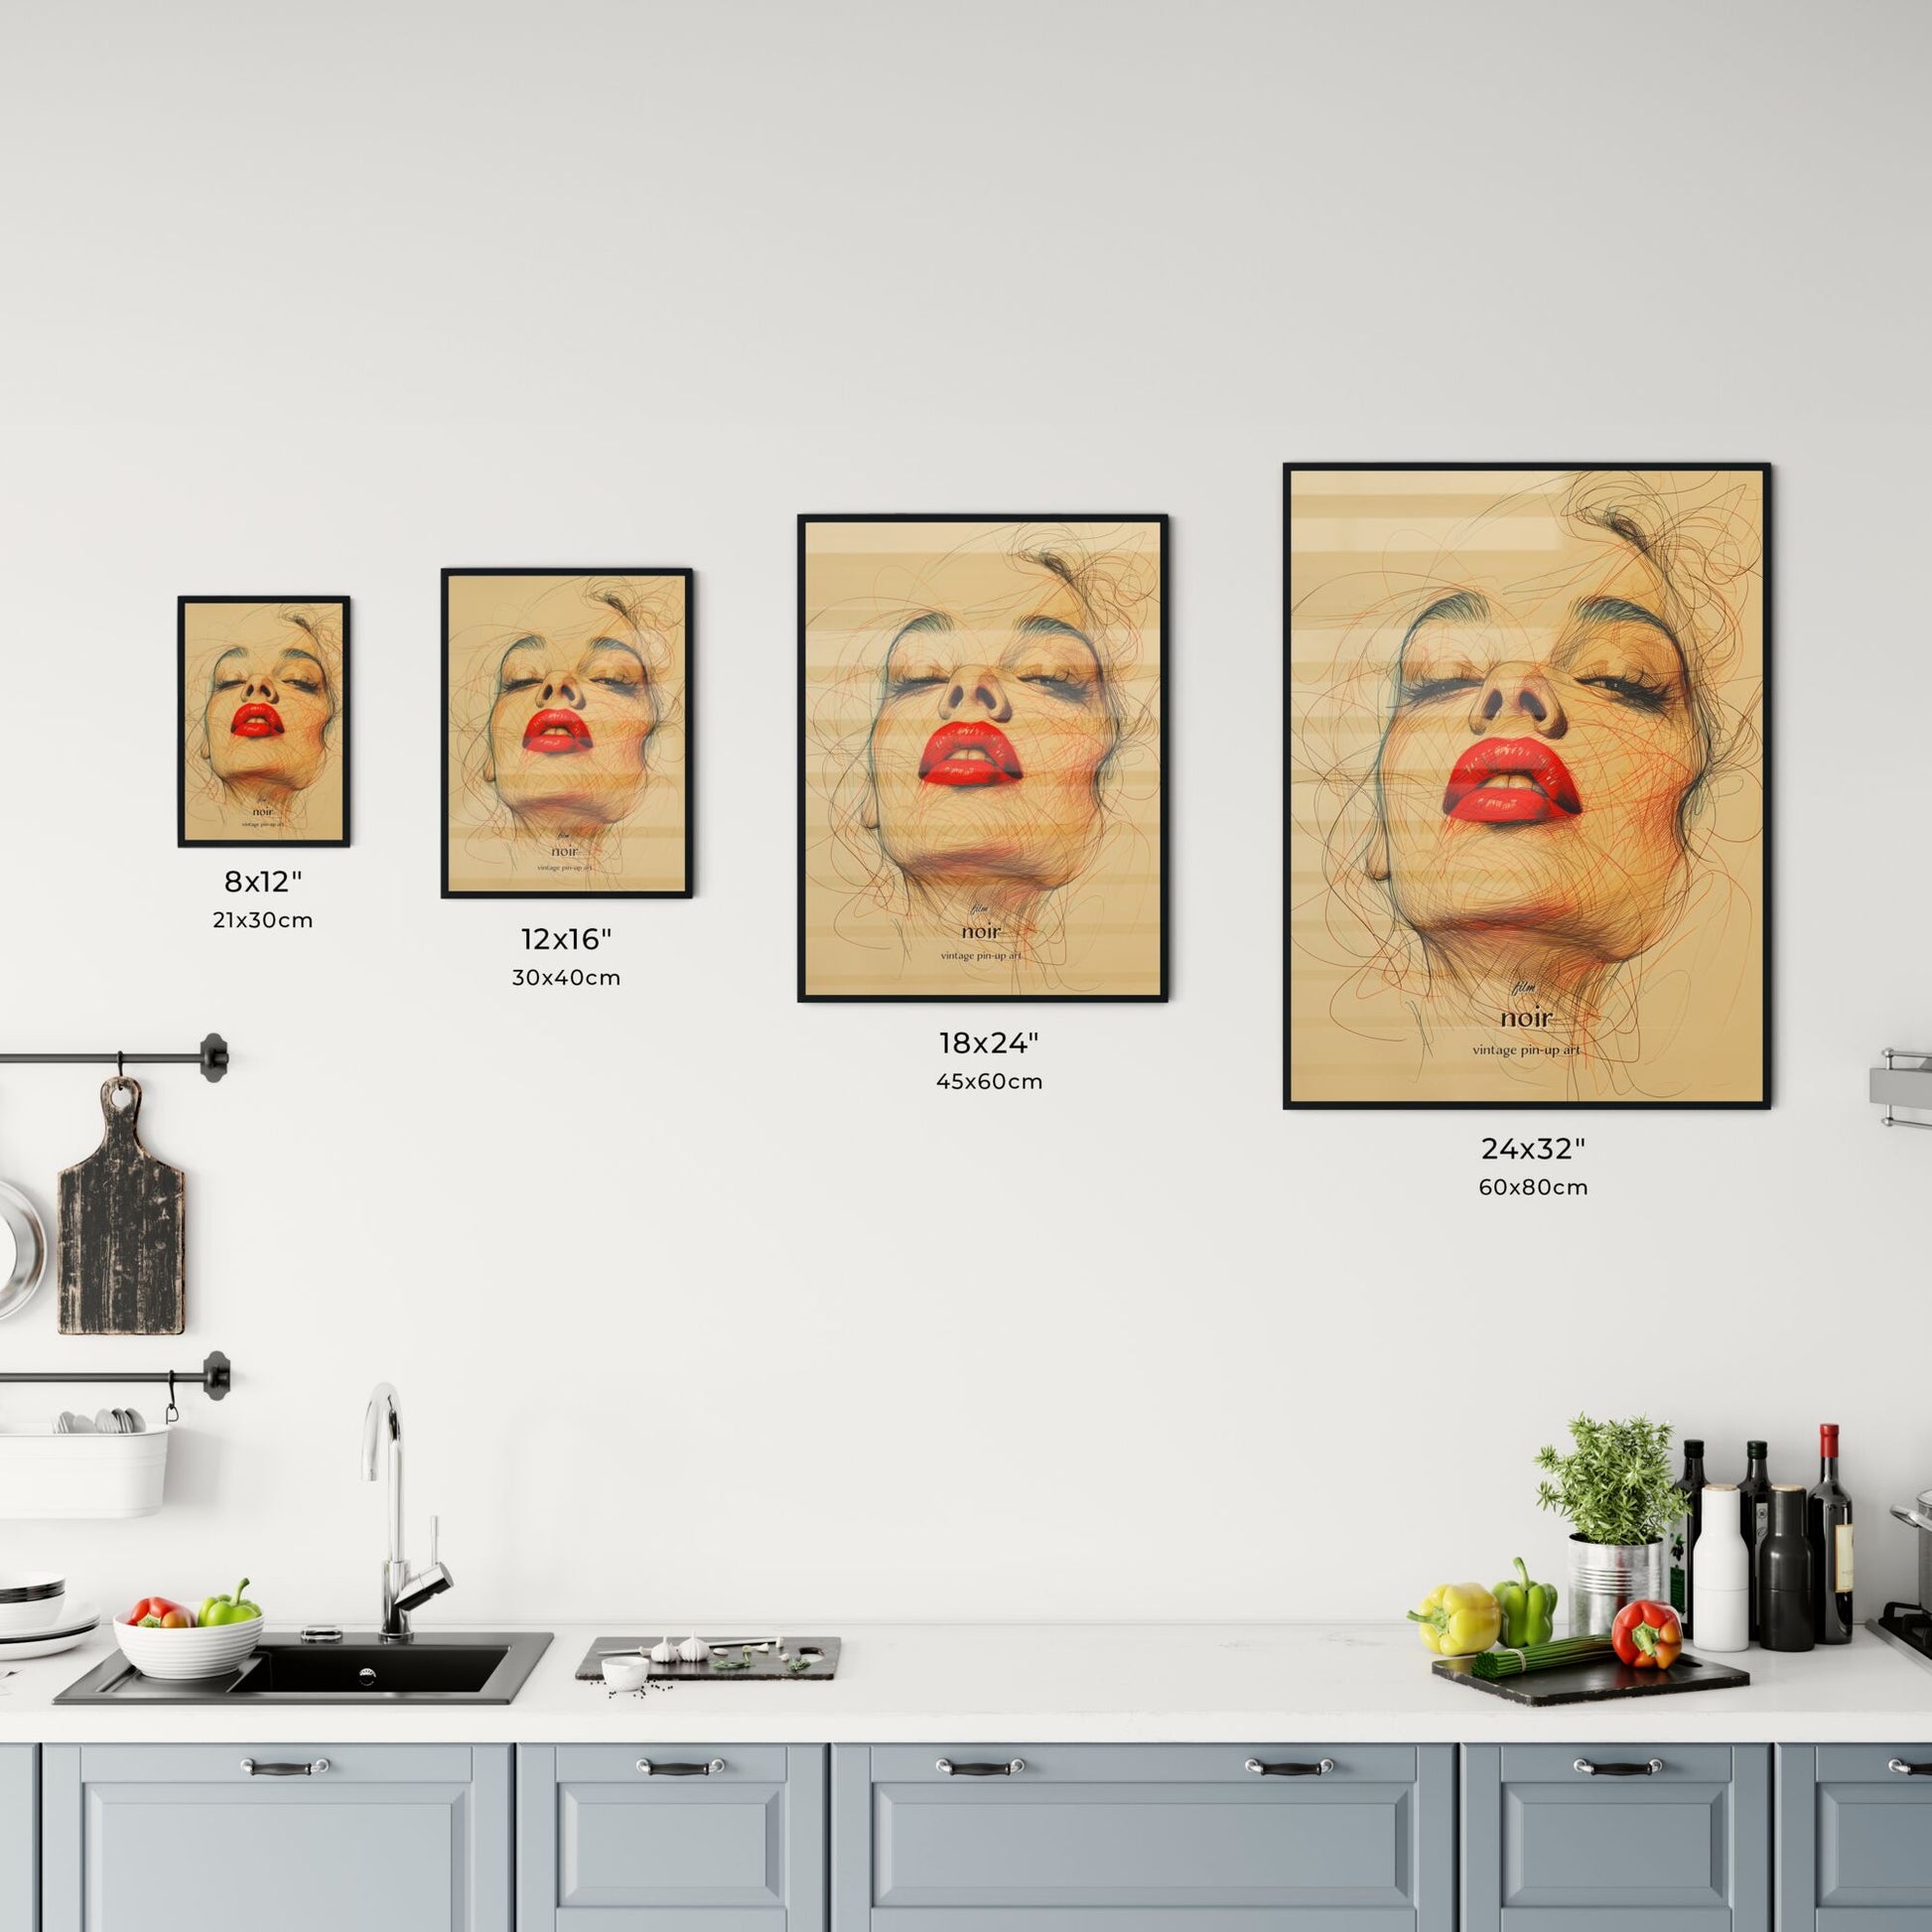 film, noir, vintage pin-up art, A Poster of a woman with red lips and red lipstick Default Title